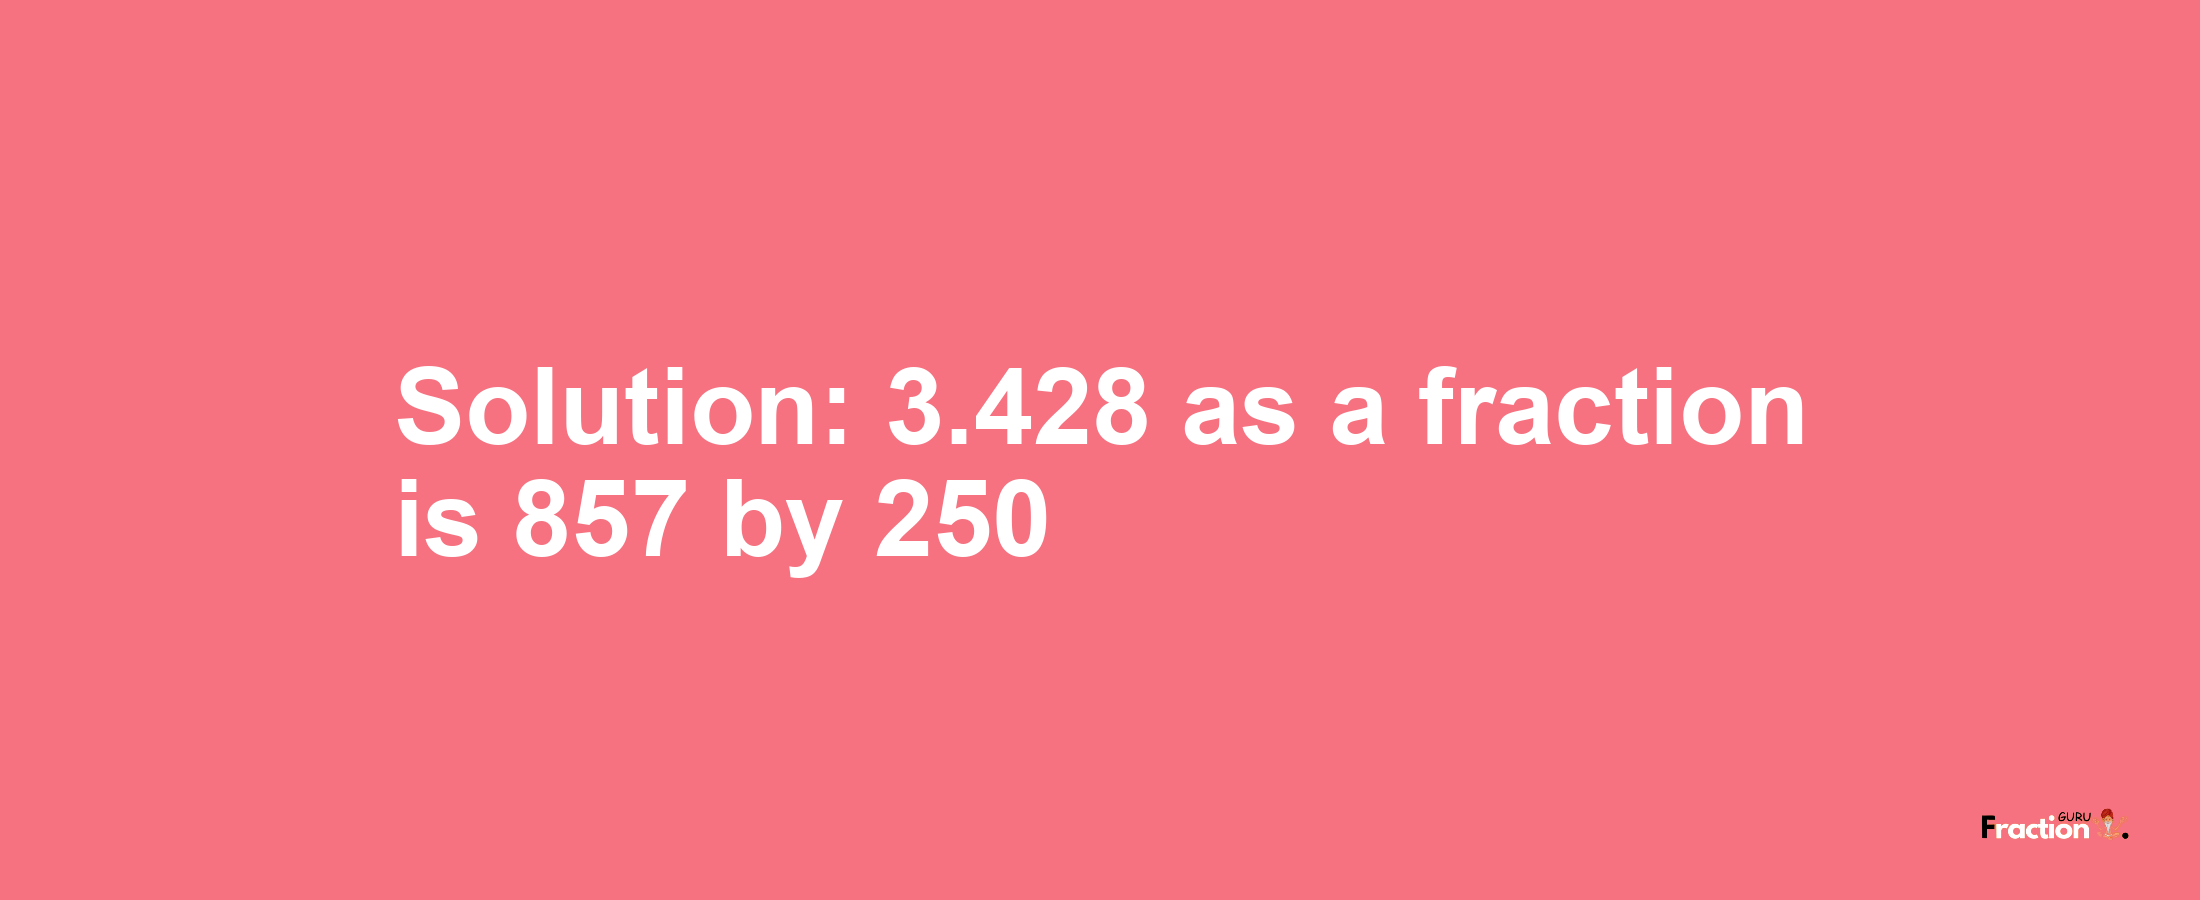 Solution:3.428 as a fraction is 857/250